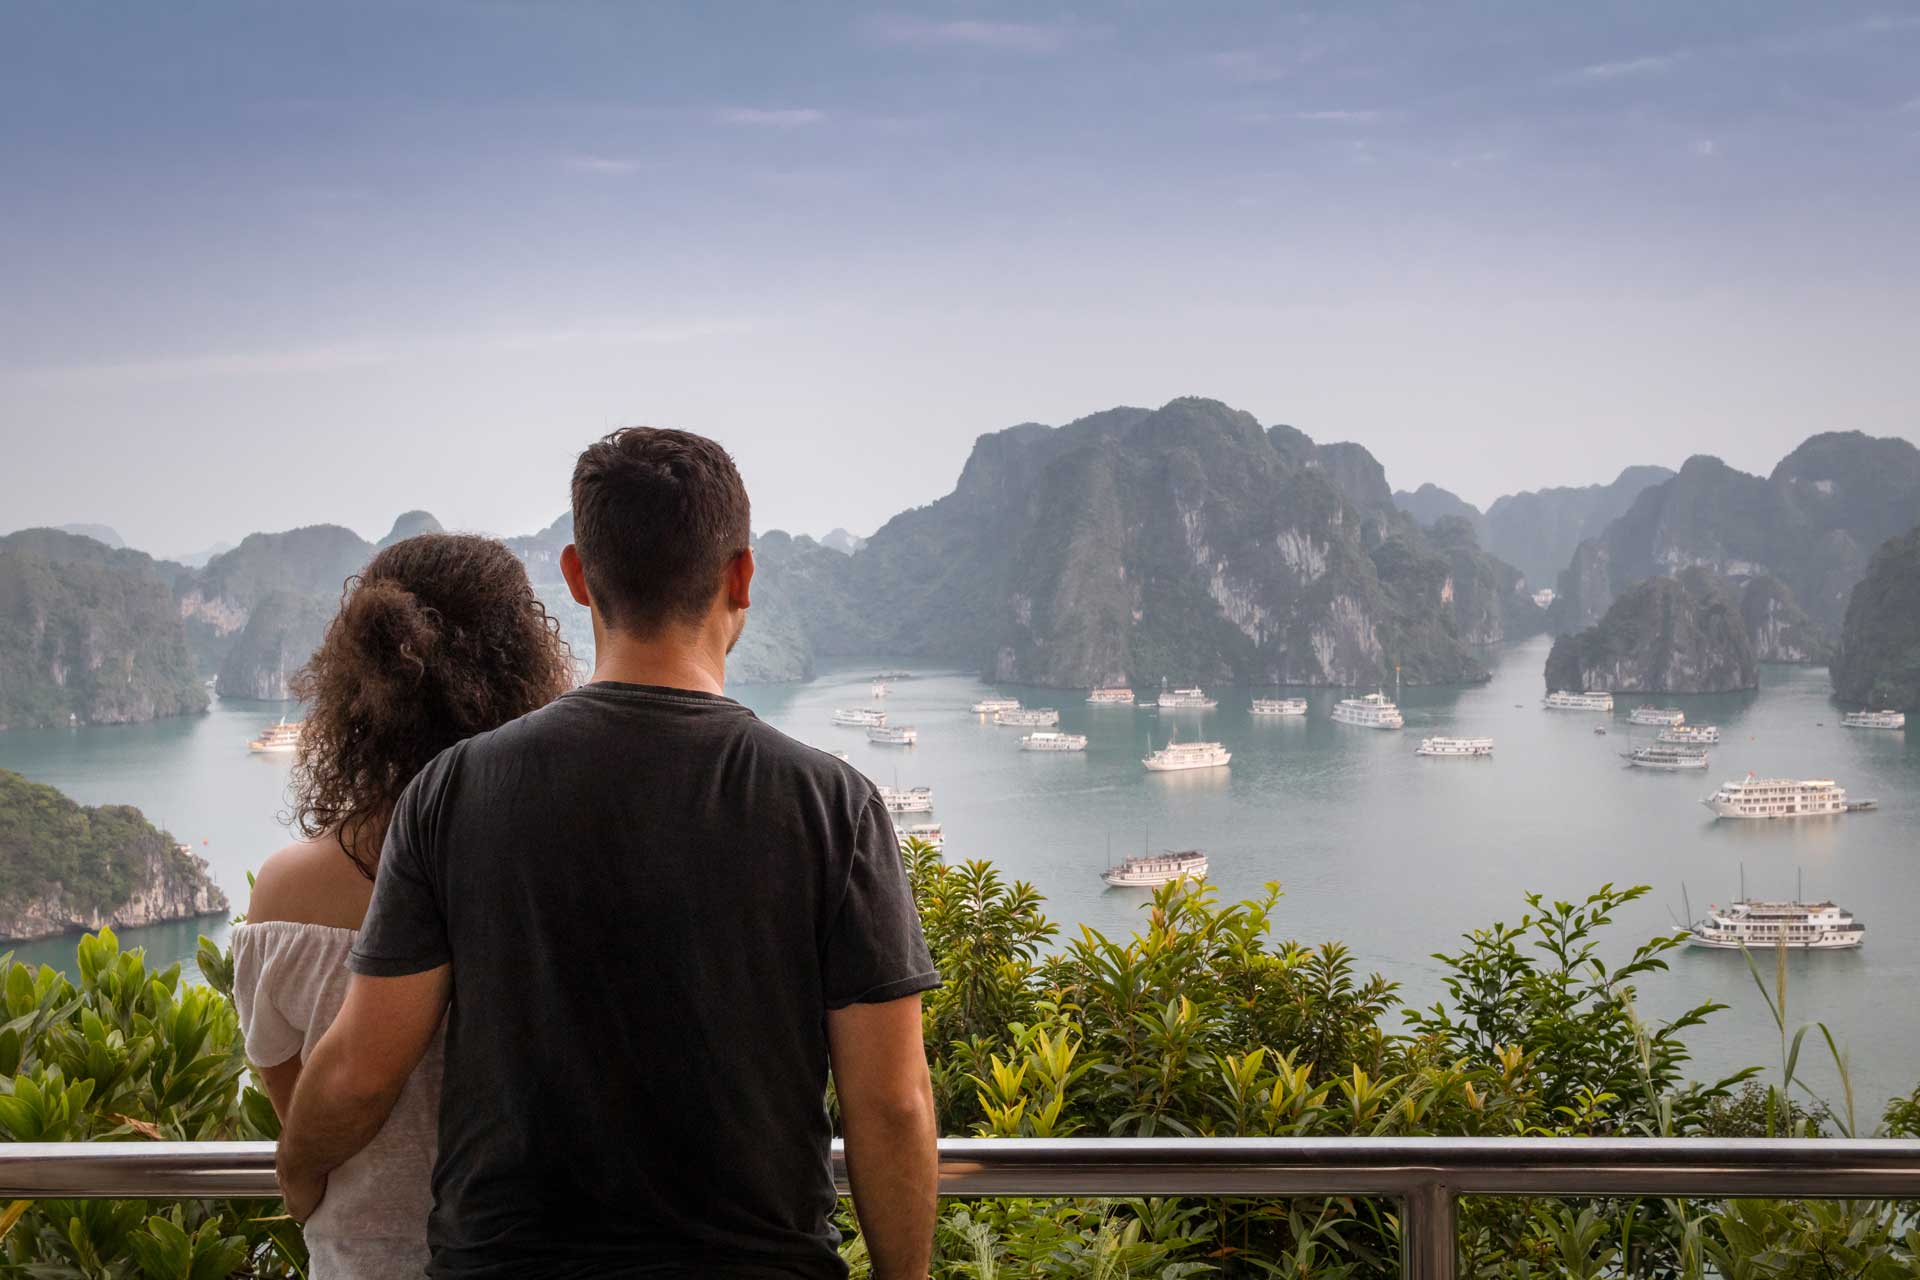 The couple admiring the stunning view of Ha Long Bay in Vietnam.